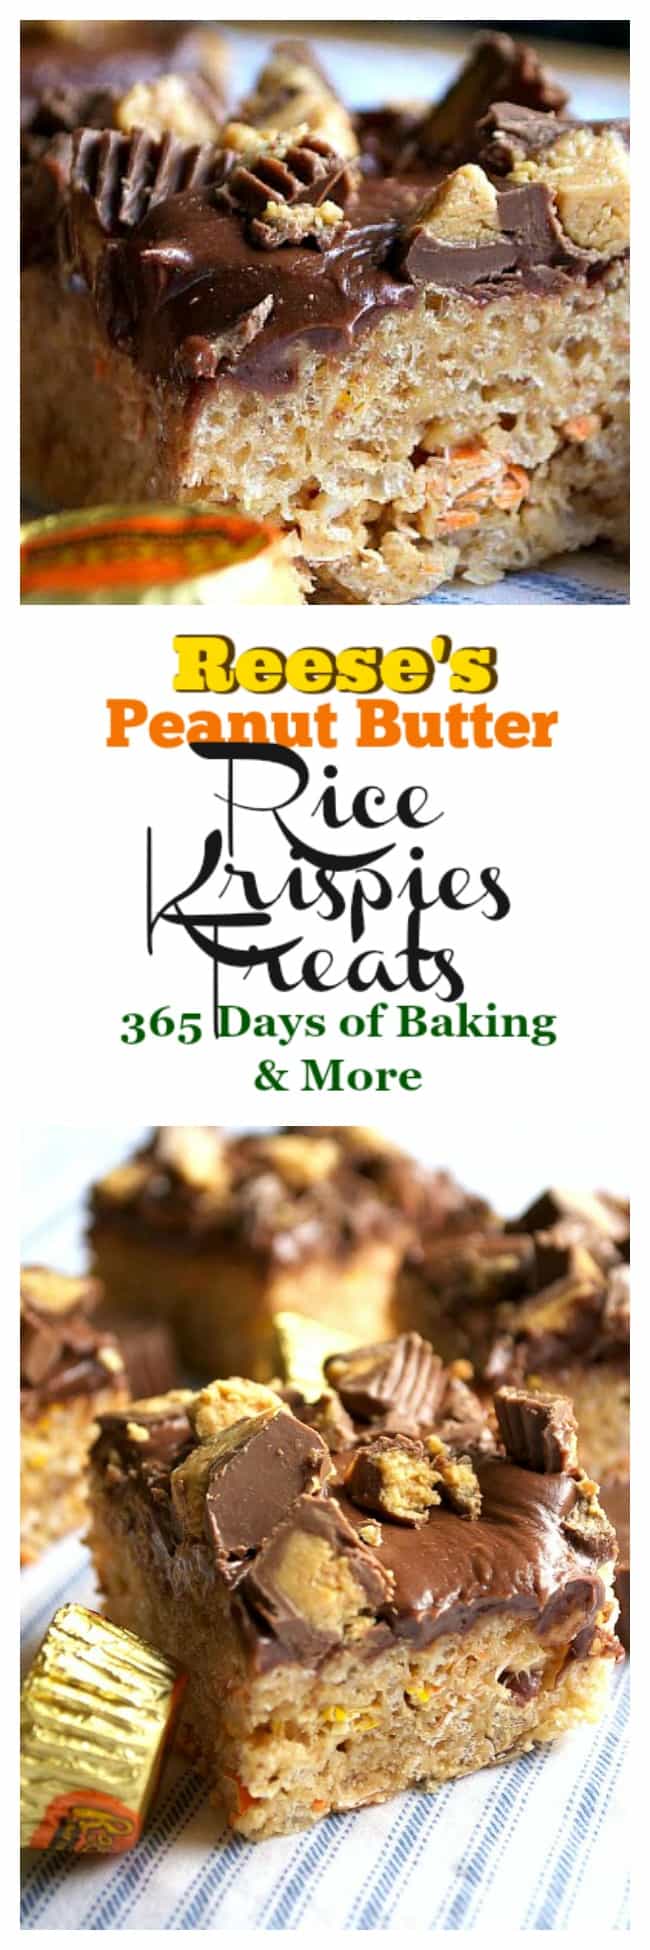 Your favorite Rice Krispies Treats made better with peanut butter, and Reese's!